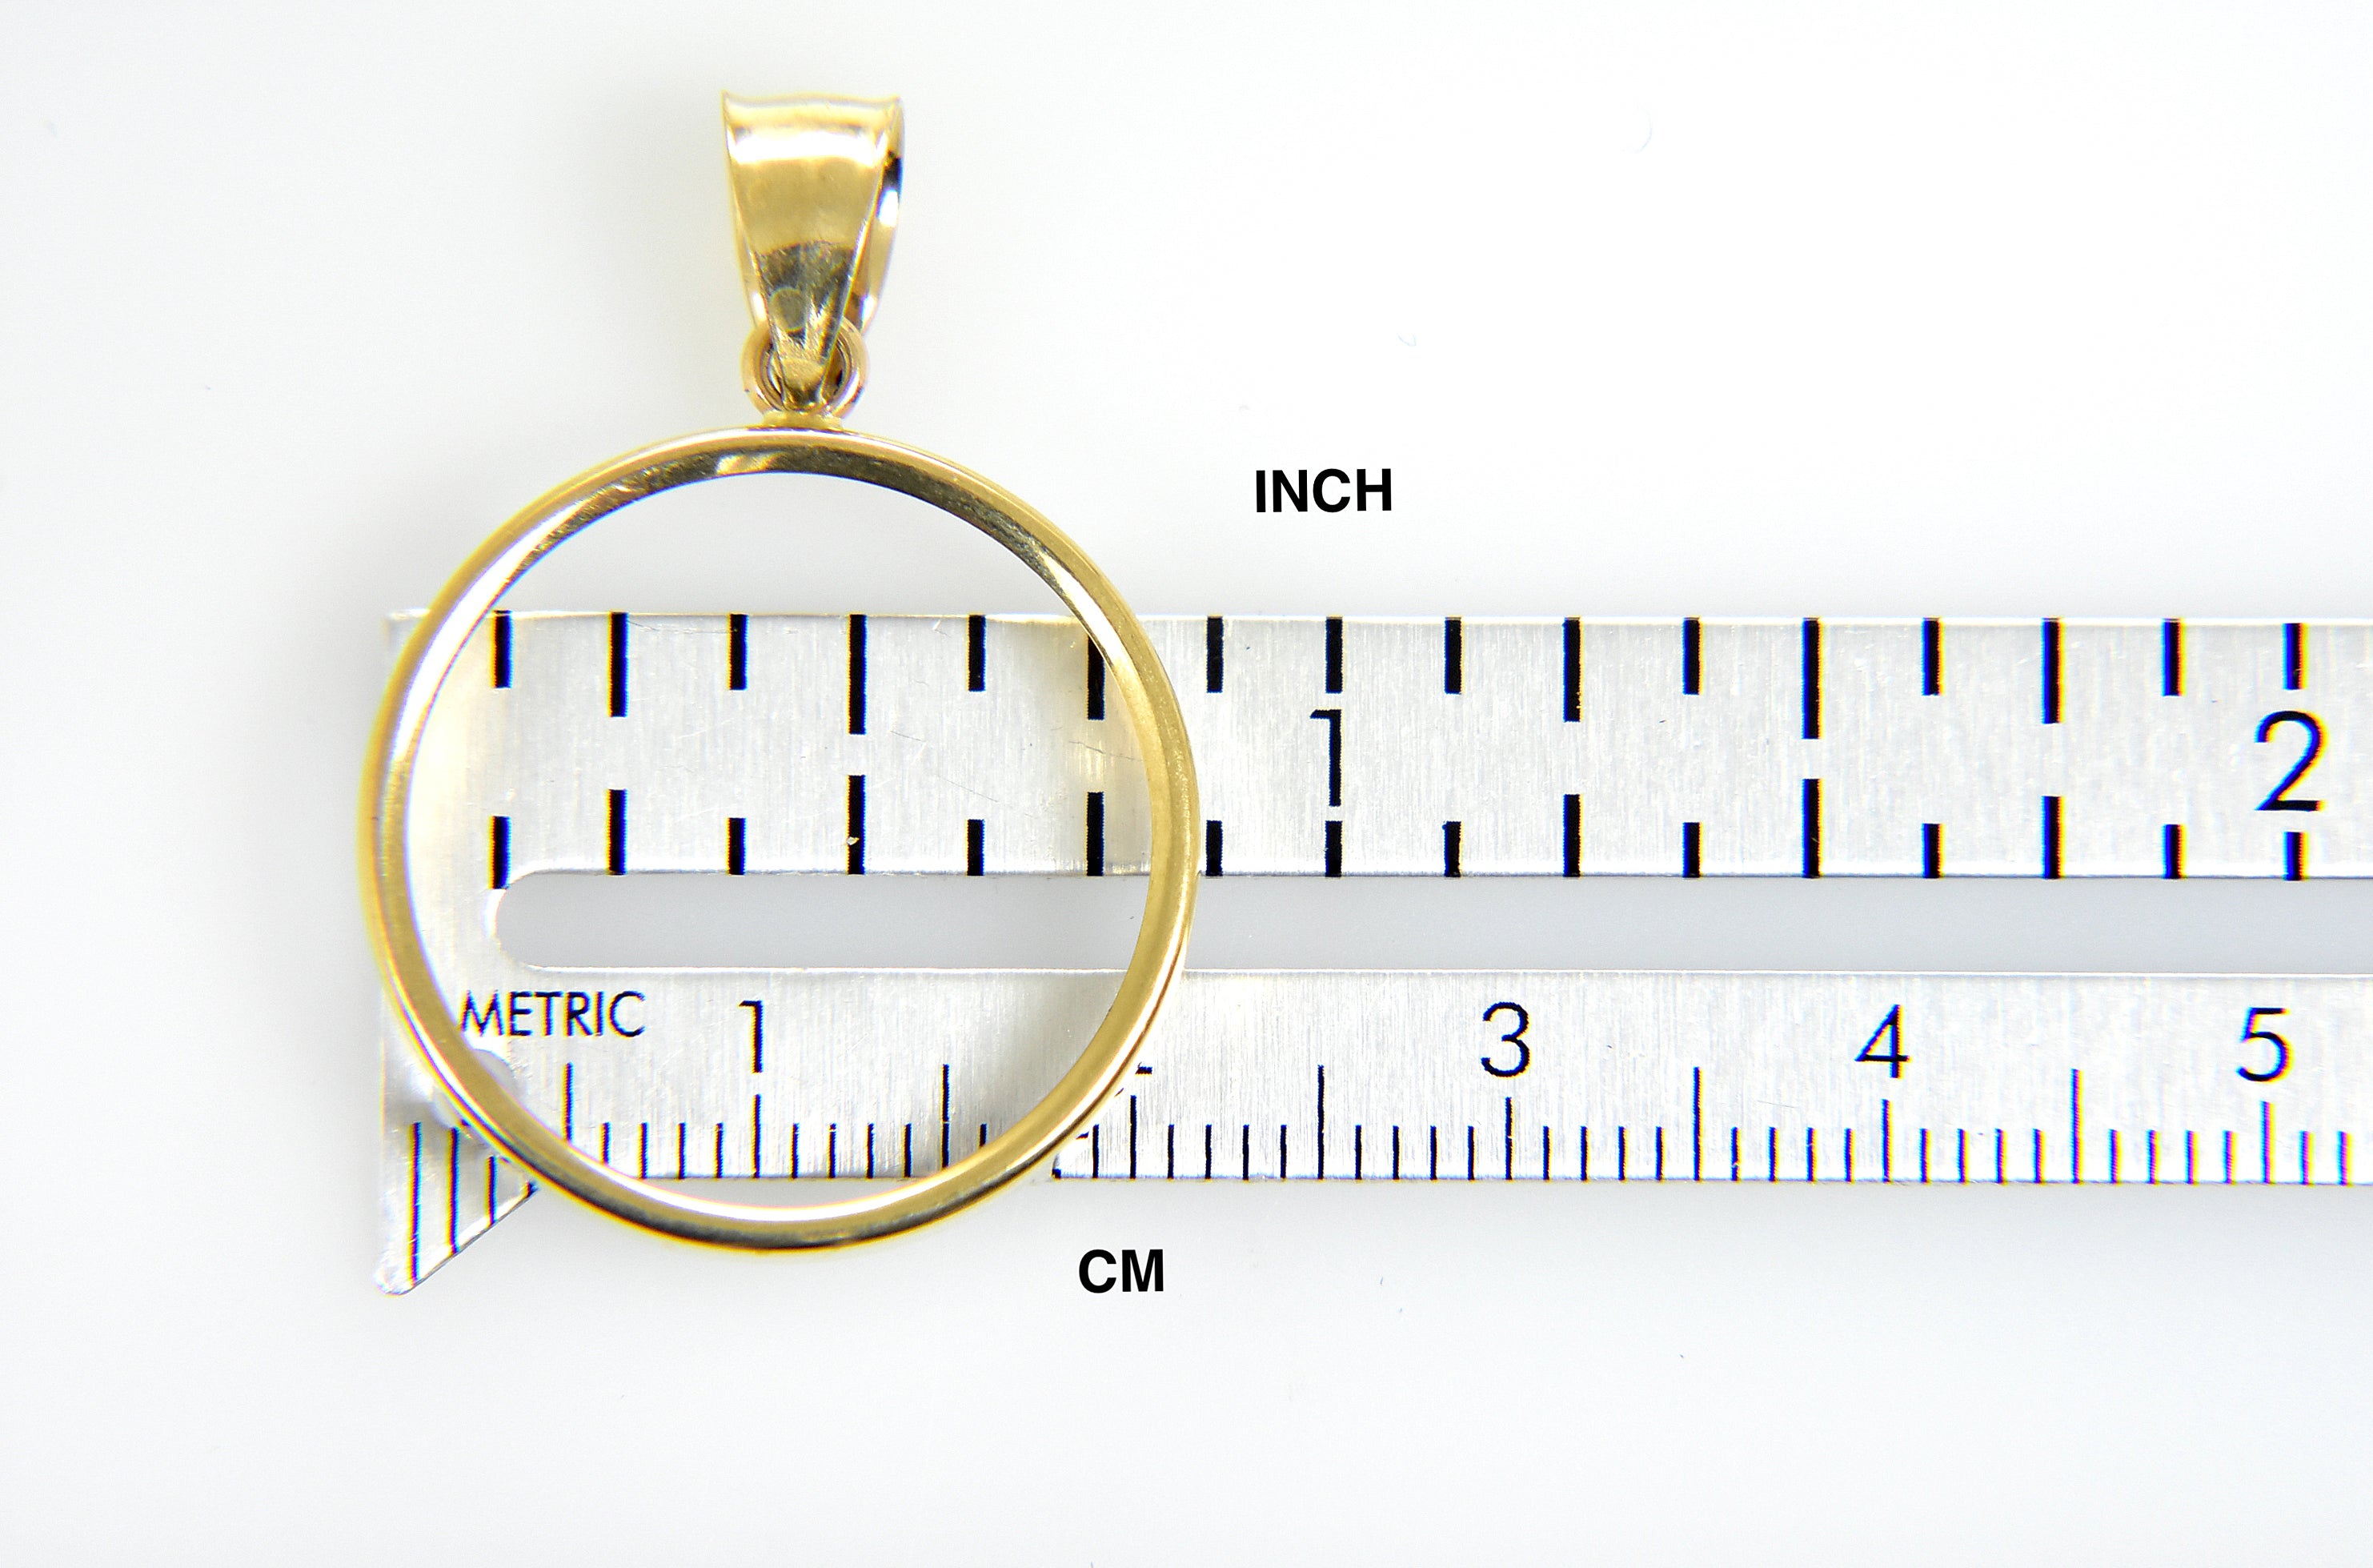 14K Yellow Gold Holds 21.5mm x 1.5mm Coins or United States US $5 Dollar Coin Holder Tab Back Frame Pendant